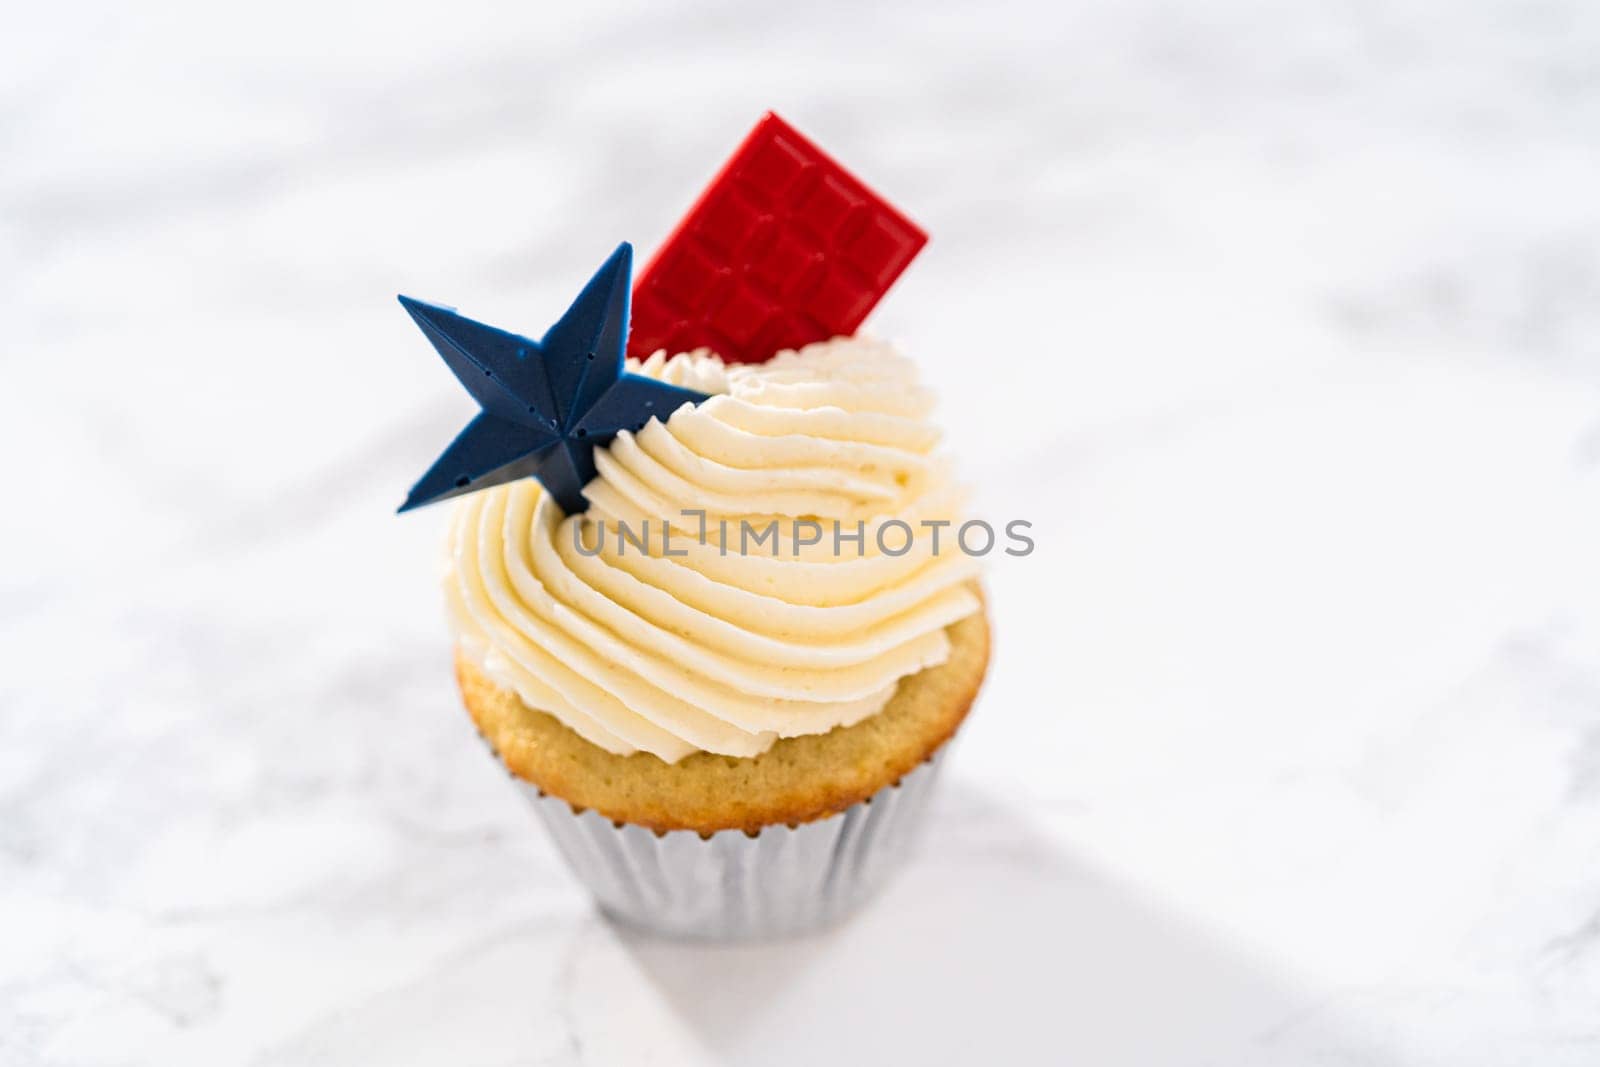 Lemon cupcakes with lemon buttercream frosting, and decorated with patriotic blue chocolate star and red mini chocolate.